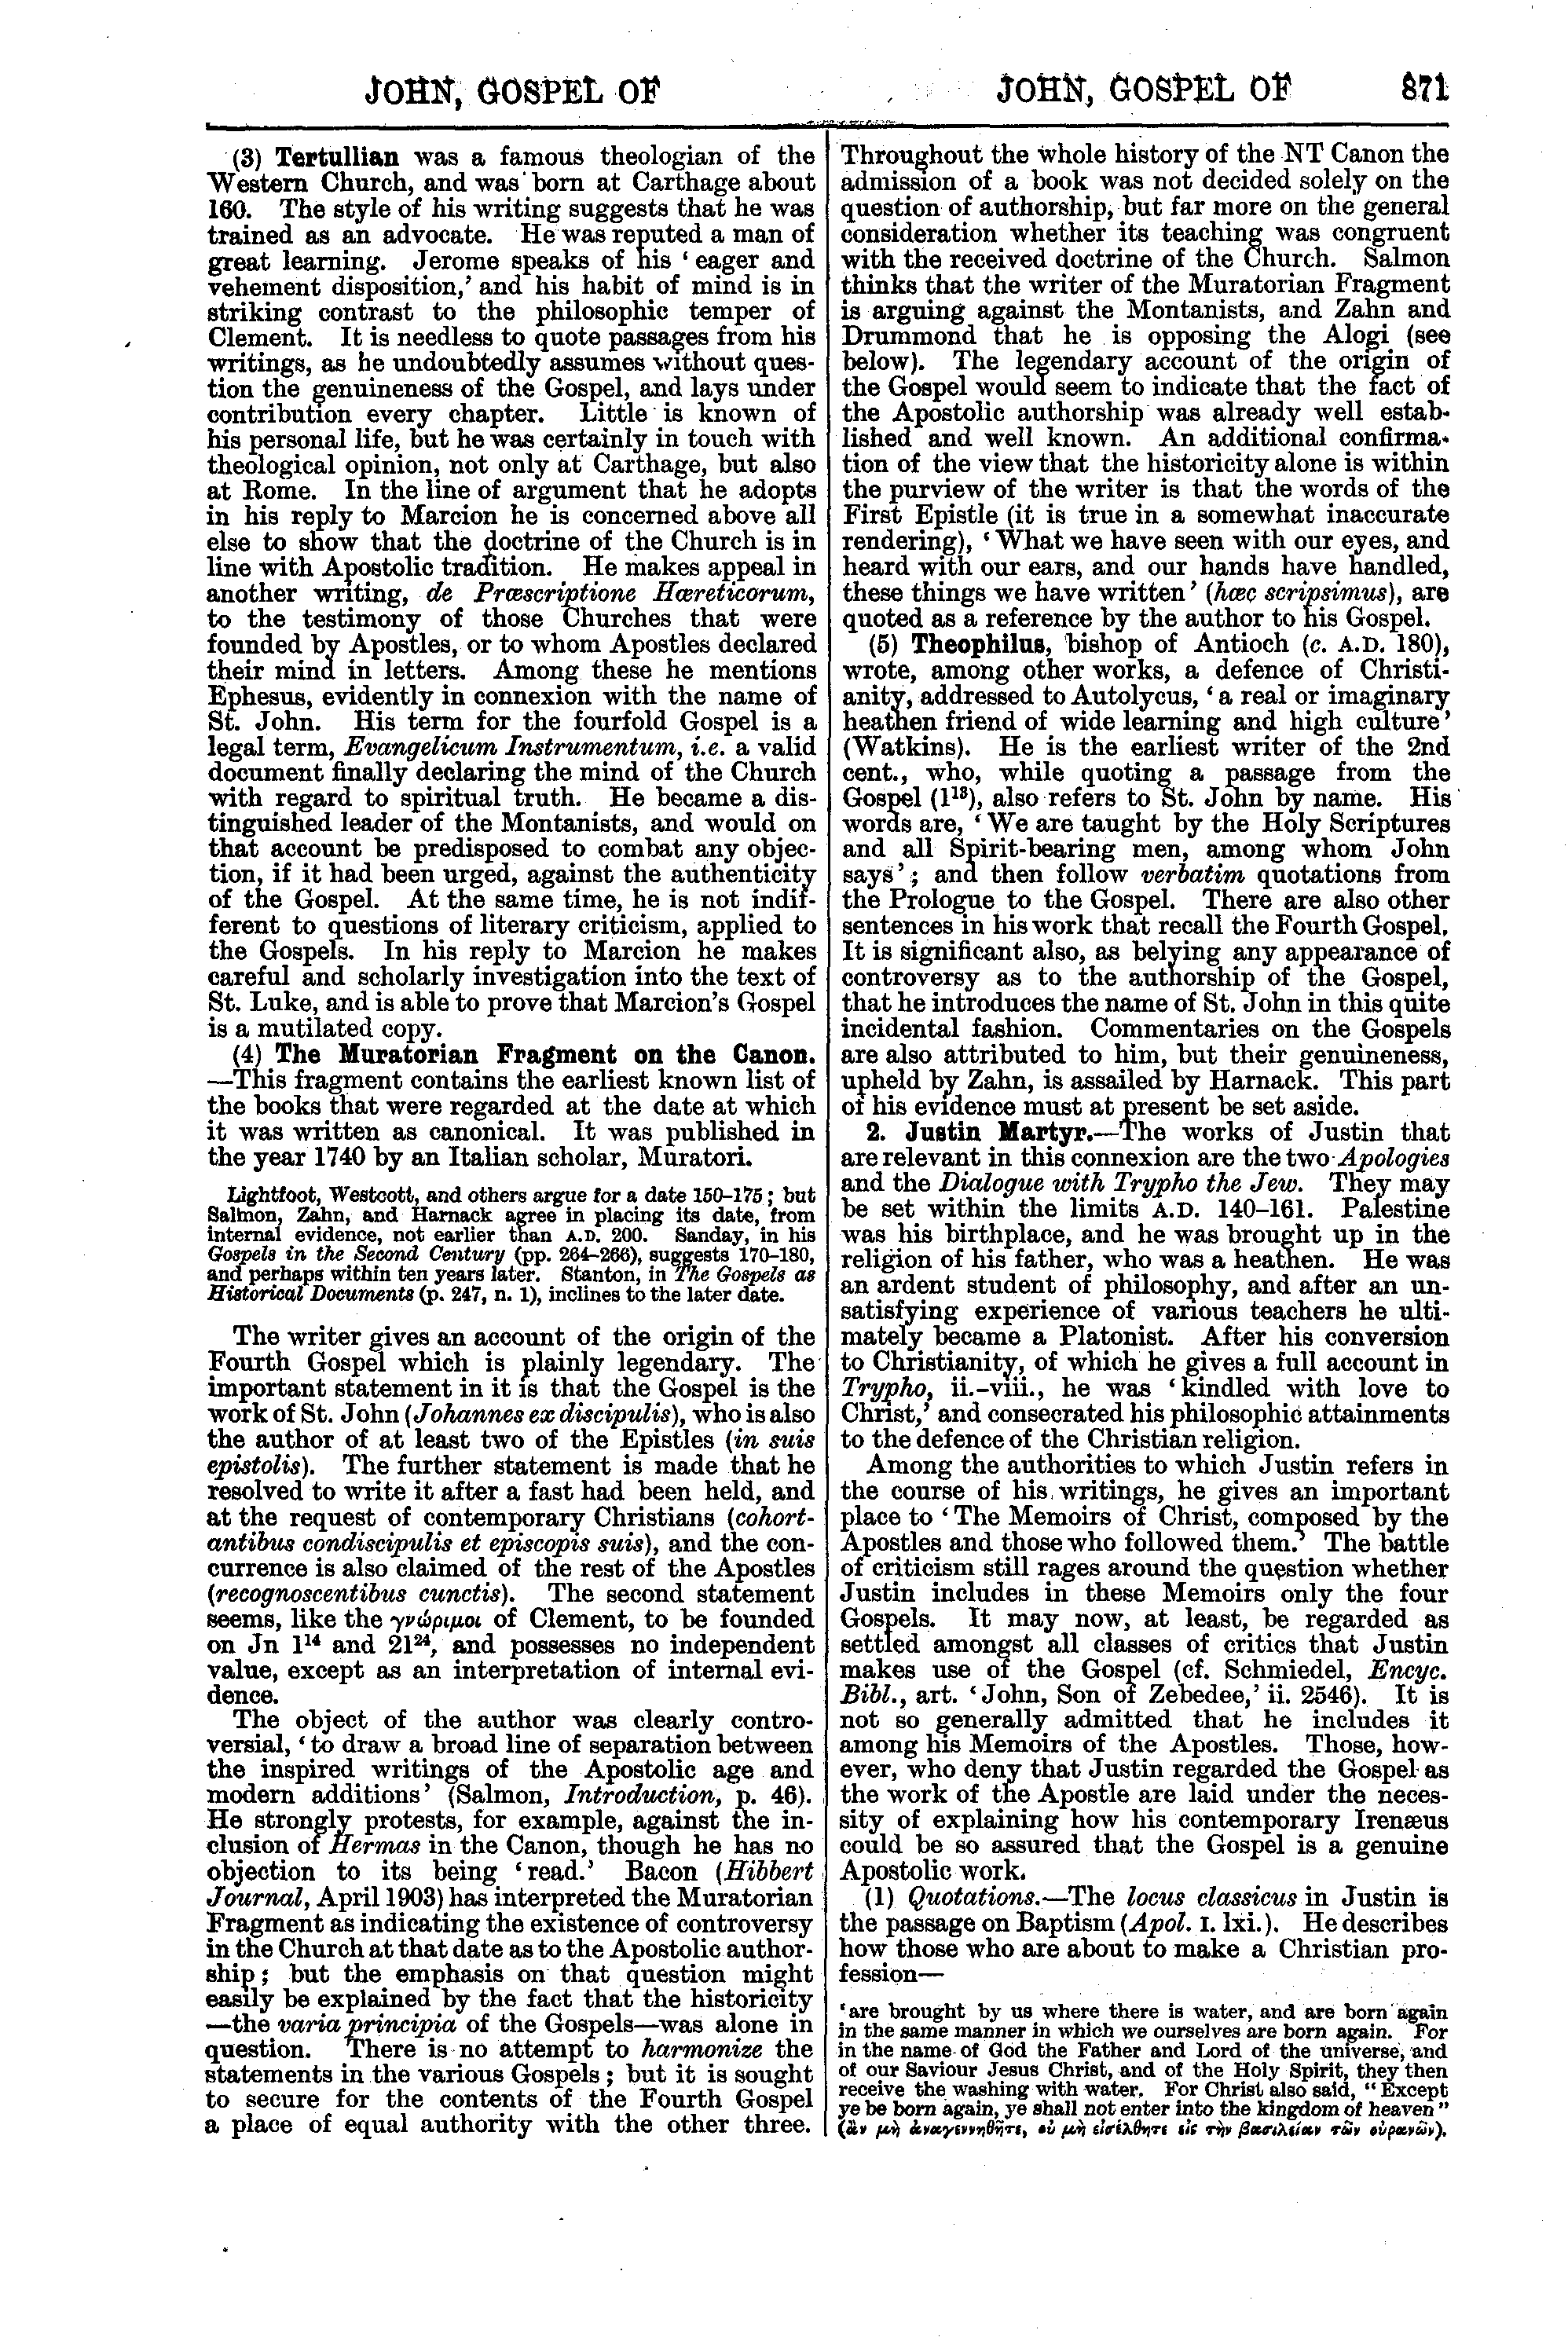 Image of page 871